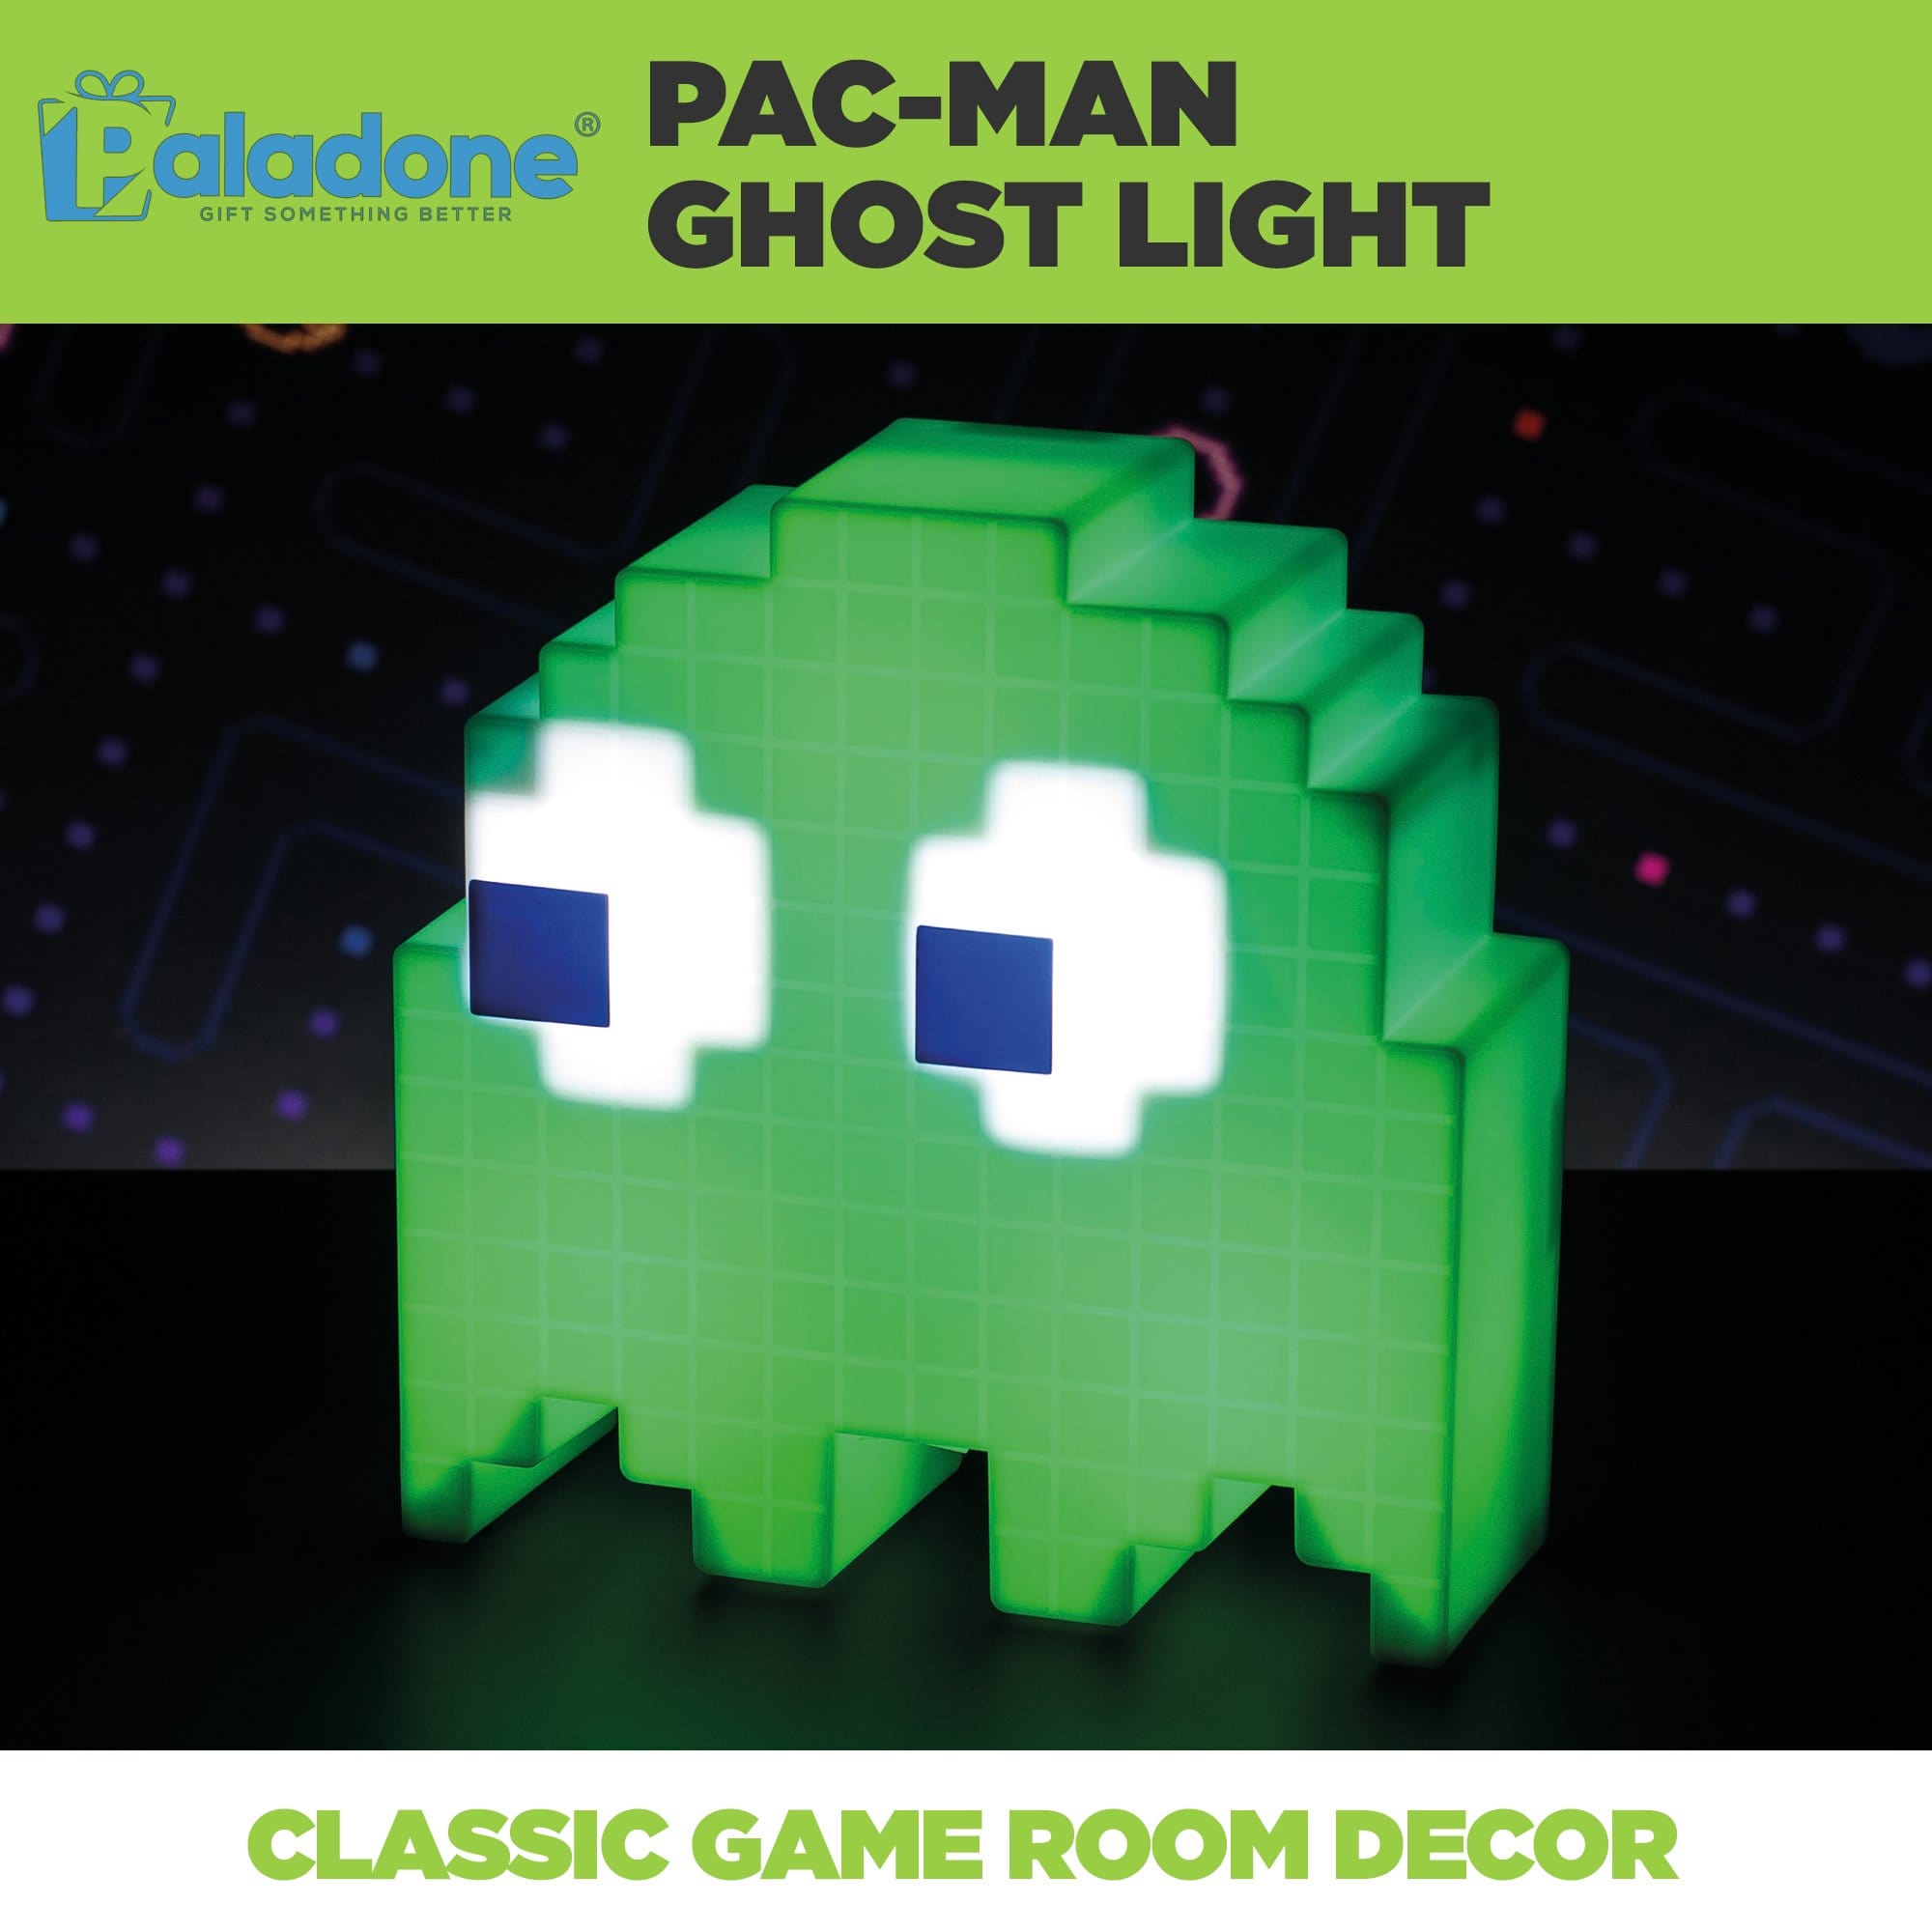 Green Pac-man ghost light is perfect game room decor for any retro gamer!